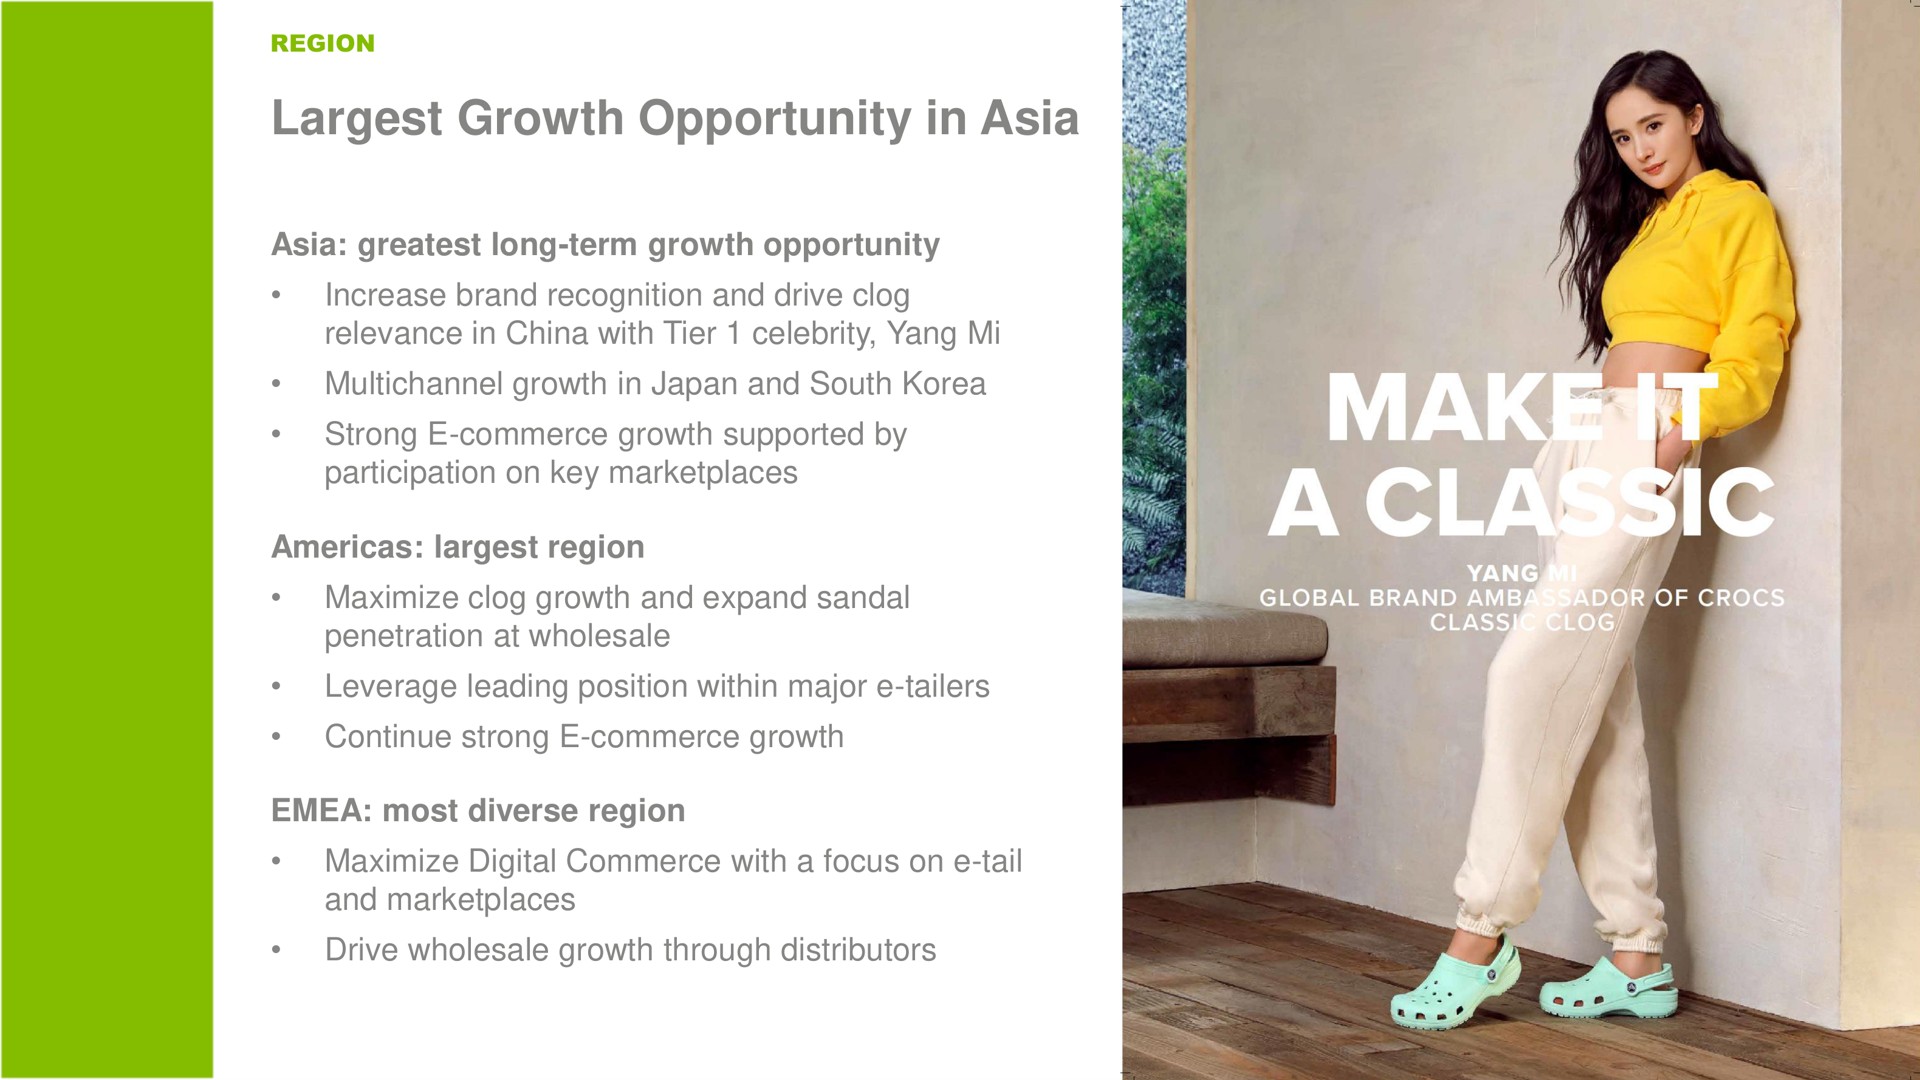 growth opportunity in japan and south drive wholesale through distributors | Crocs